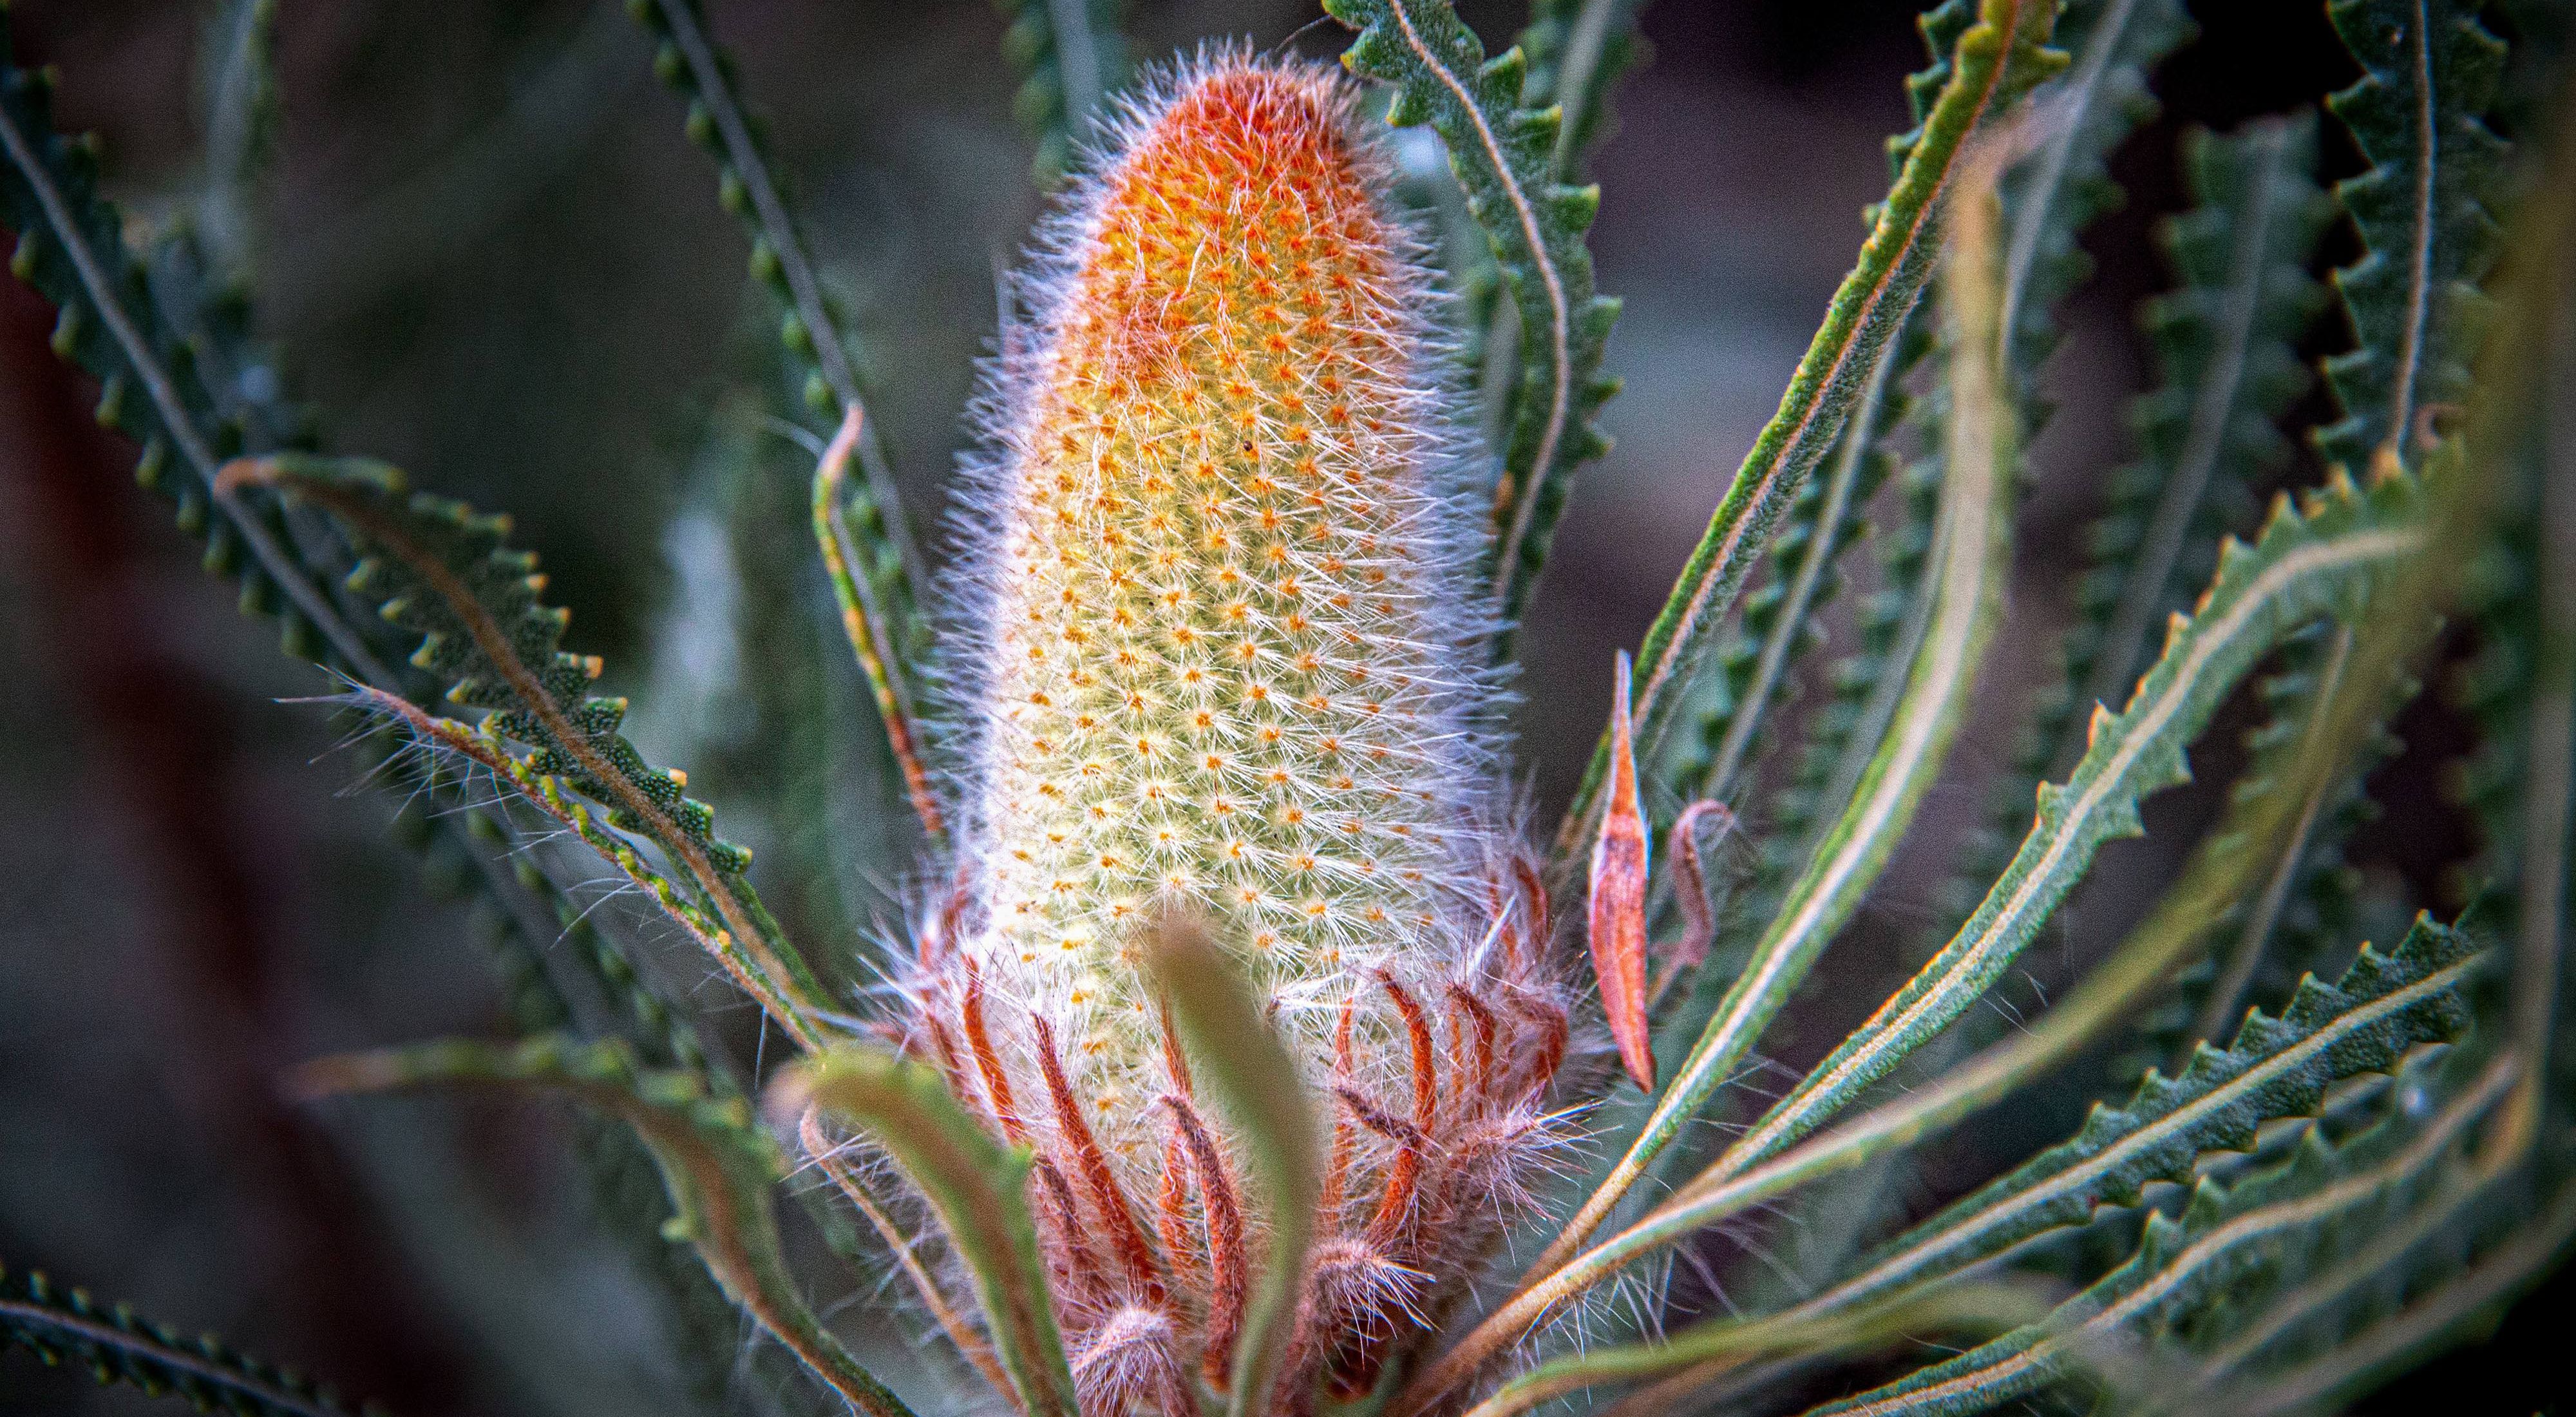 A new bloom on the side of a busy road. There are many varieties of Banksia native to Western Australia.